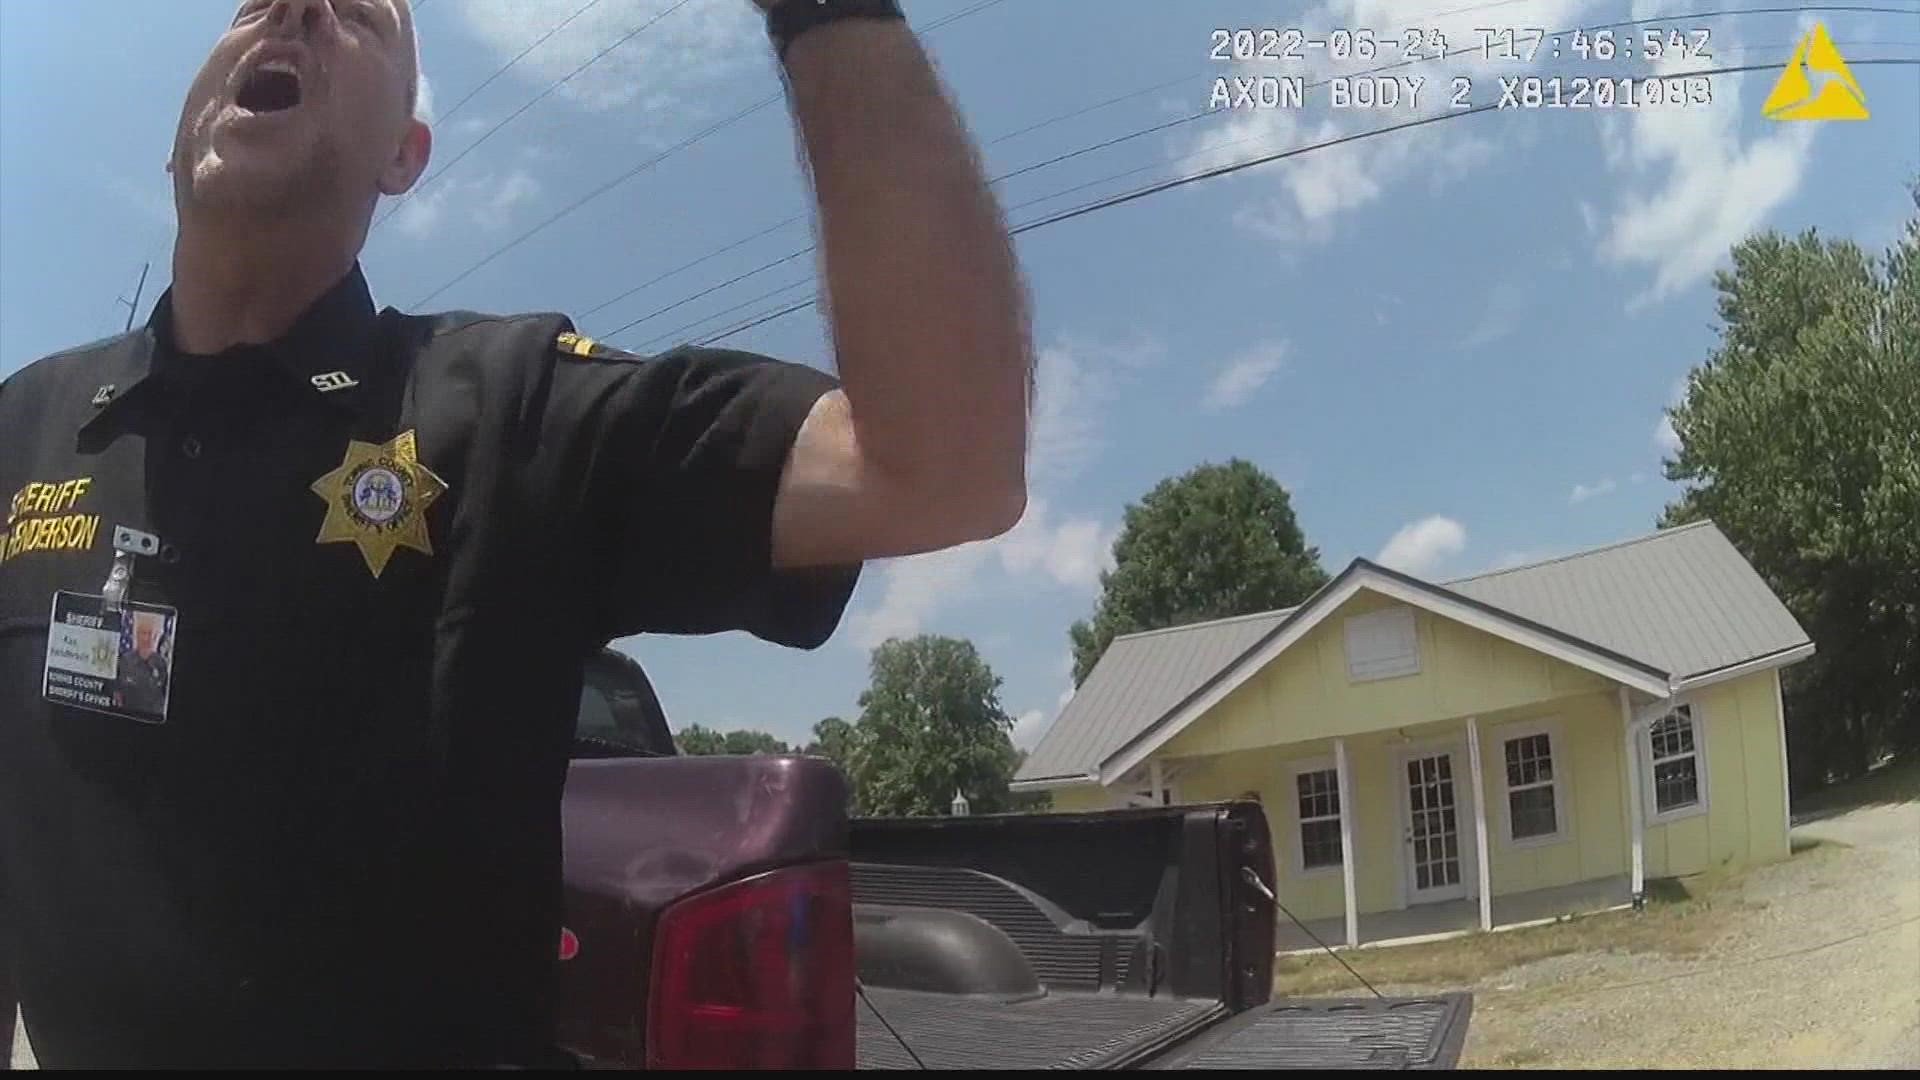 The heated argument was caught on body camera video.